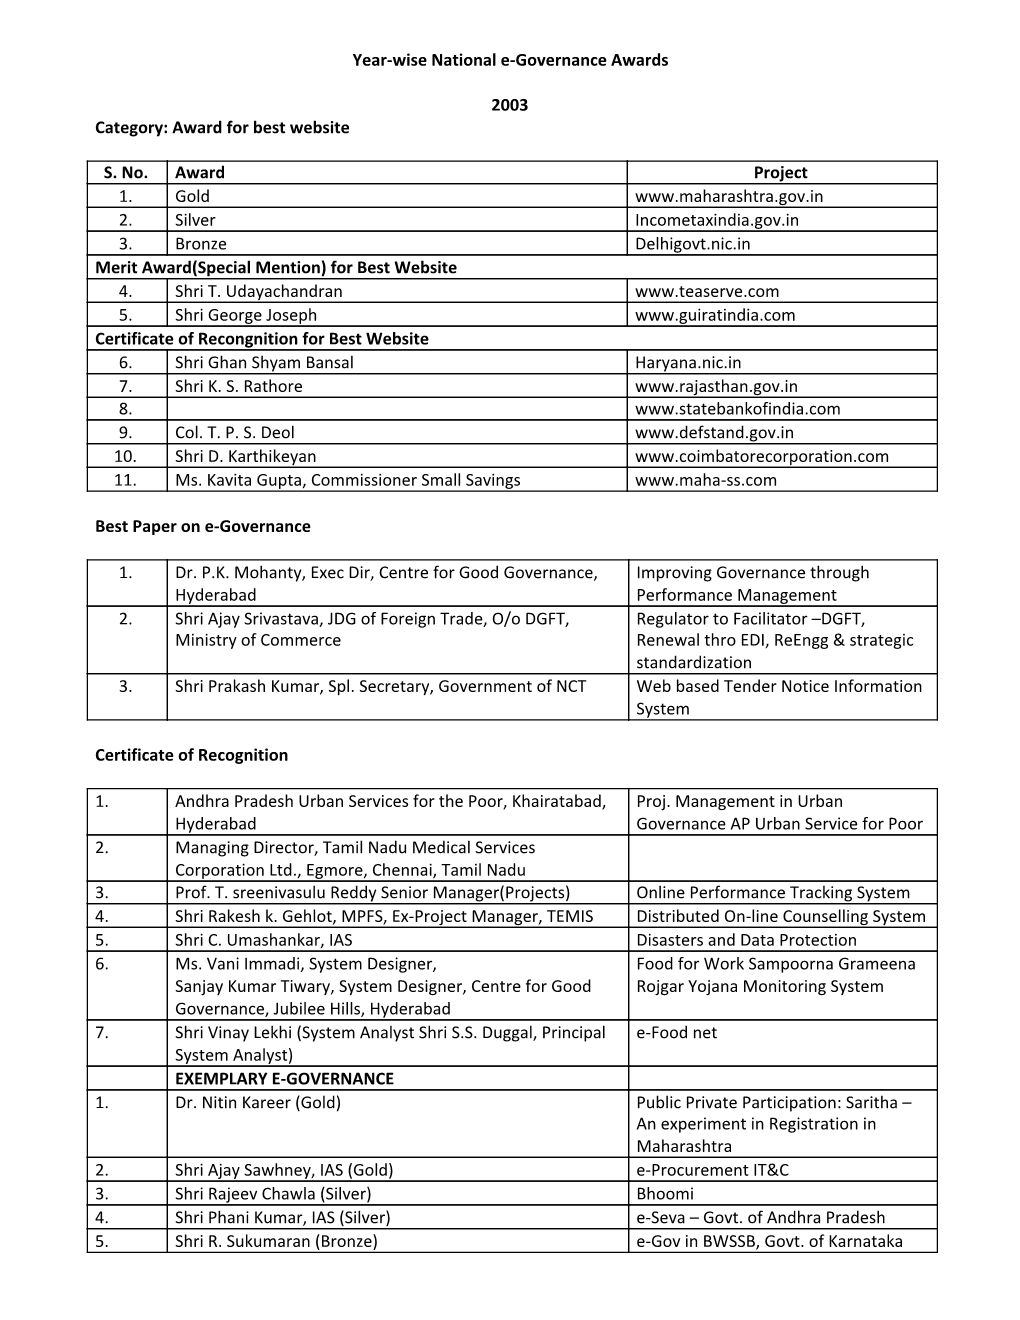 Year-Wise National E-Governance Awards 2003 Category